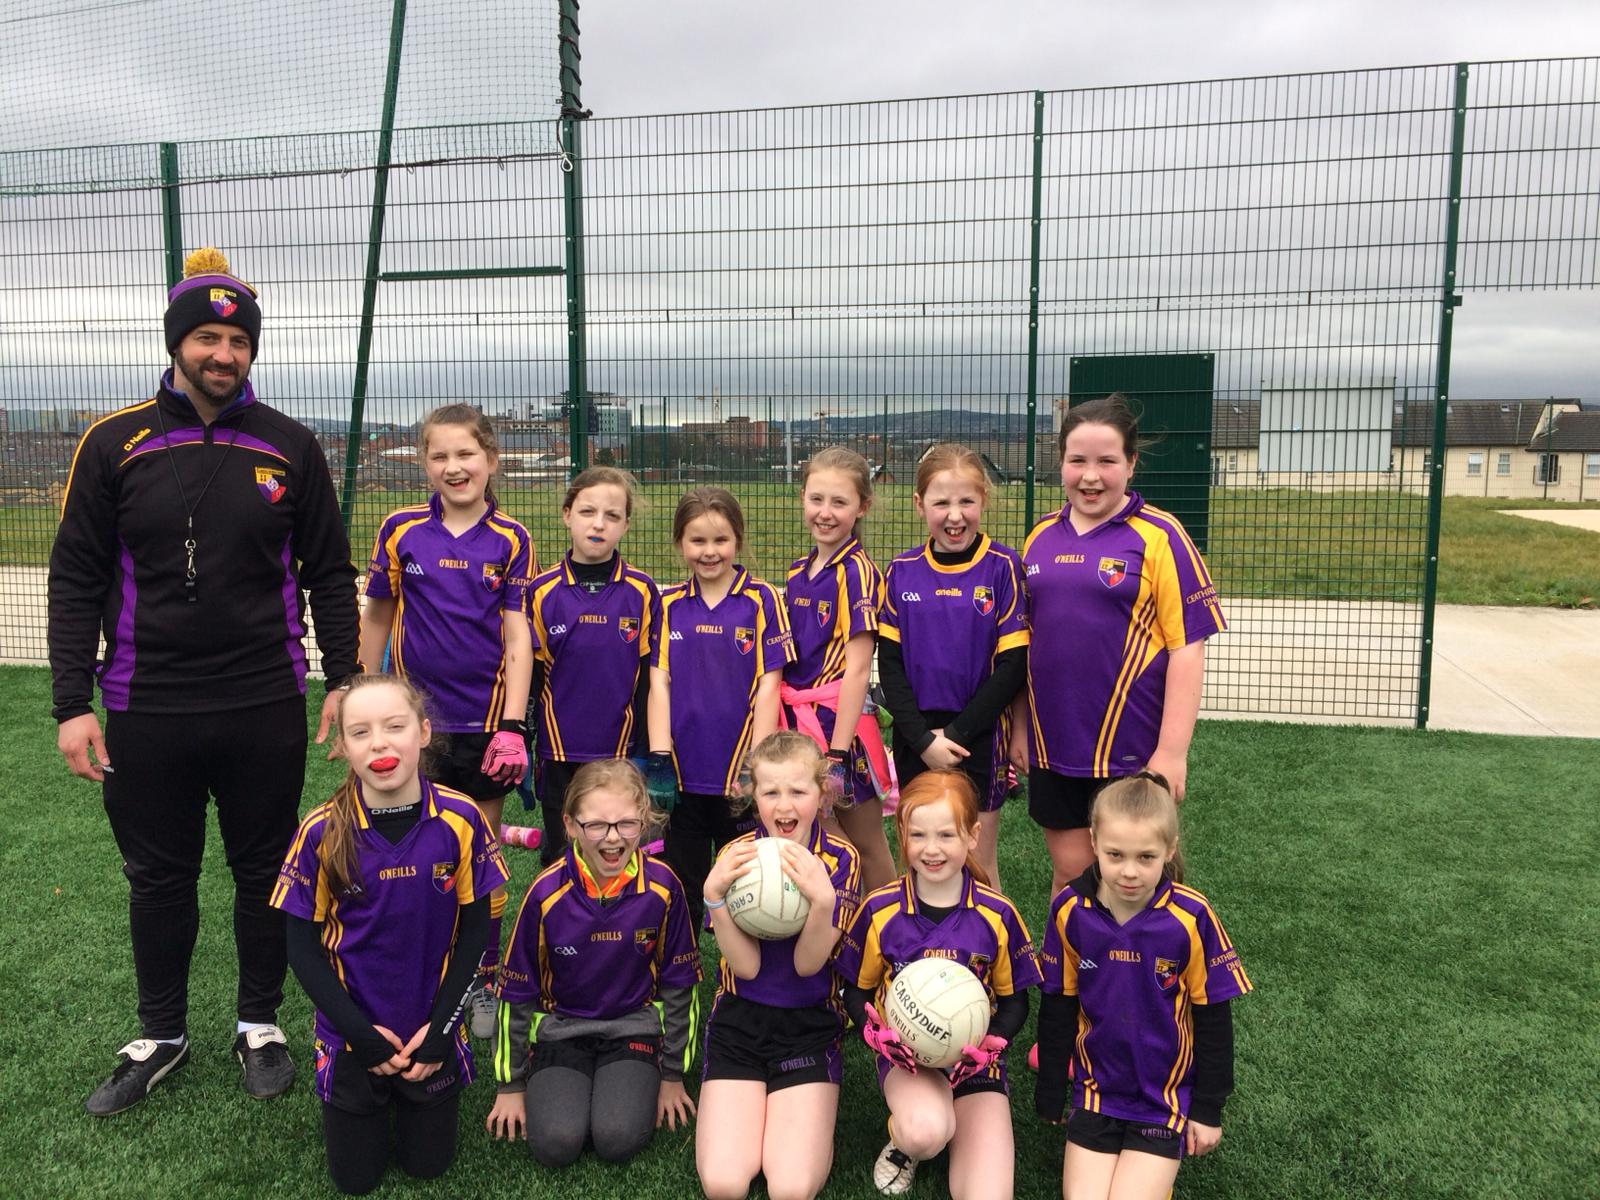 Our U10 girls attended their first Belfast Go Games blitzs of the season